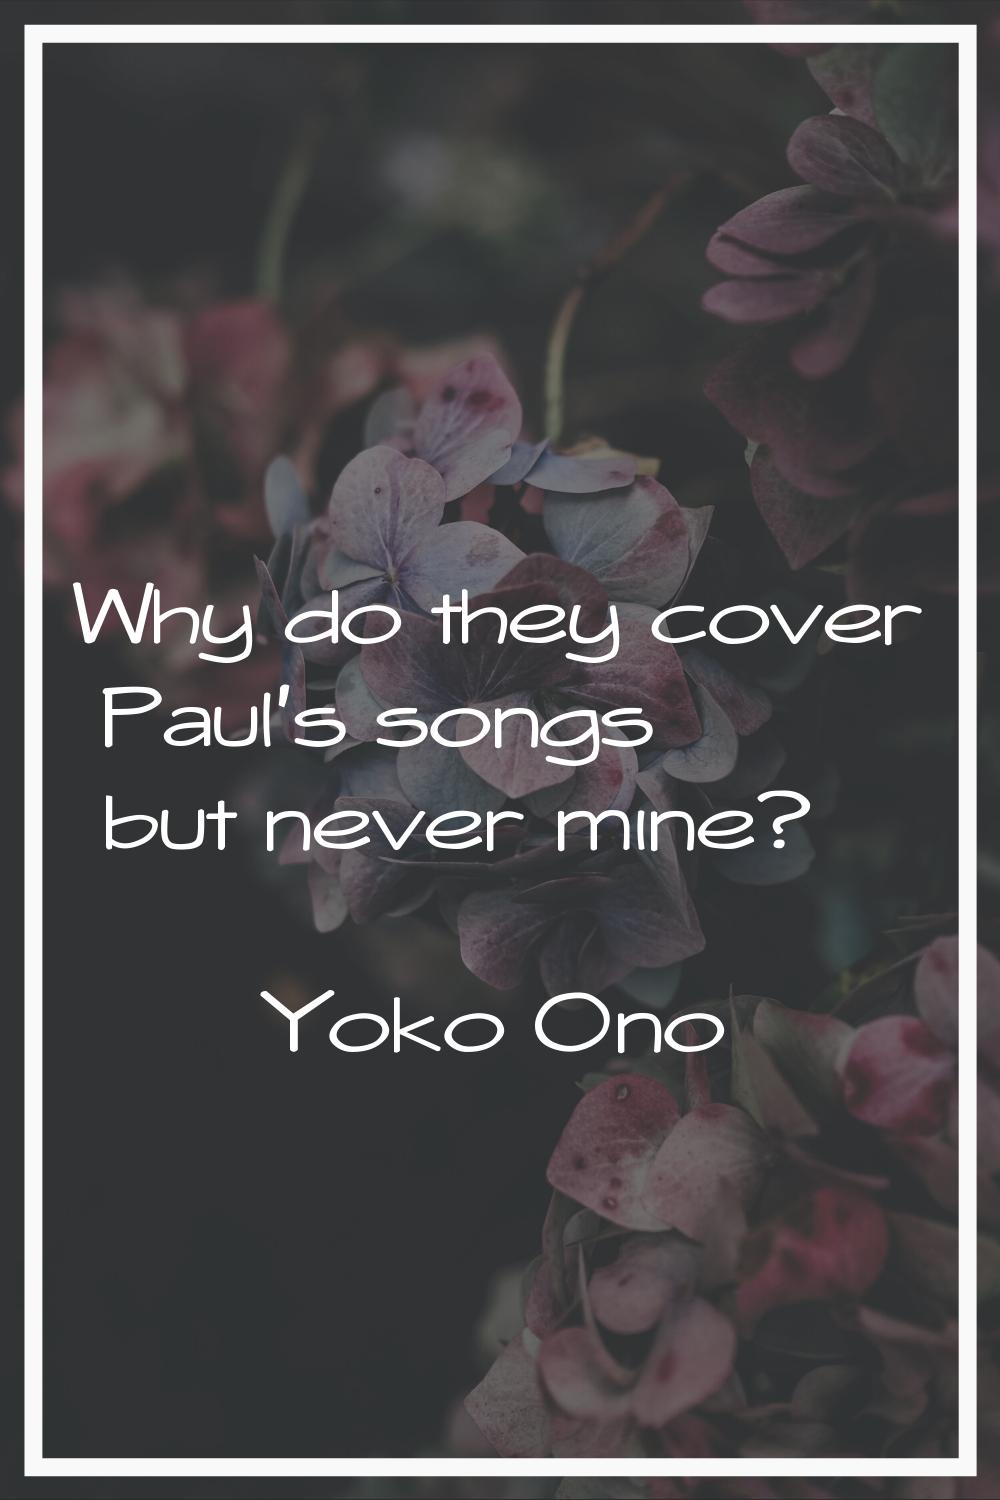 Why do they cover Paul's songs but never mine?